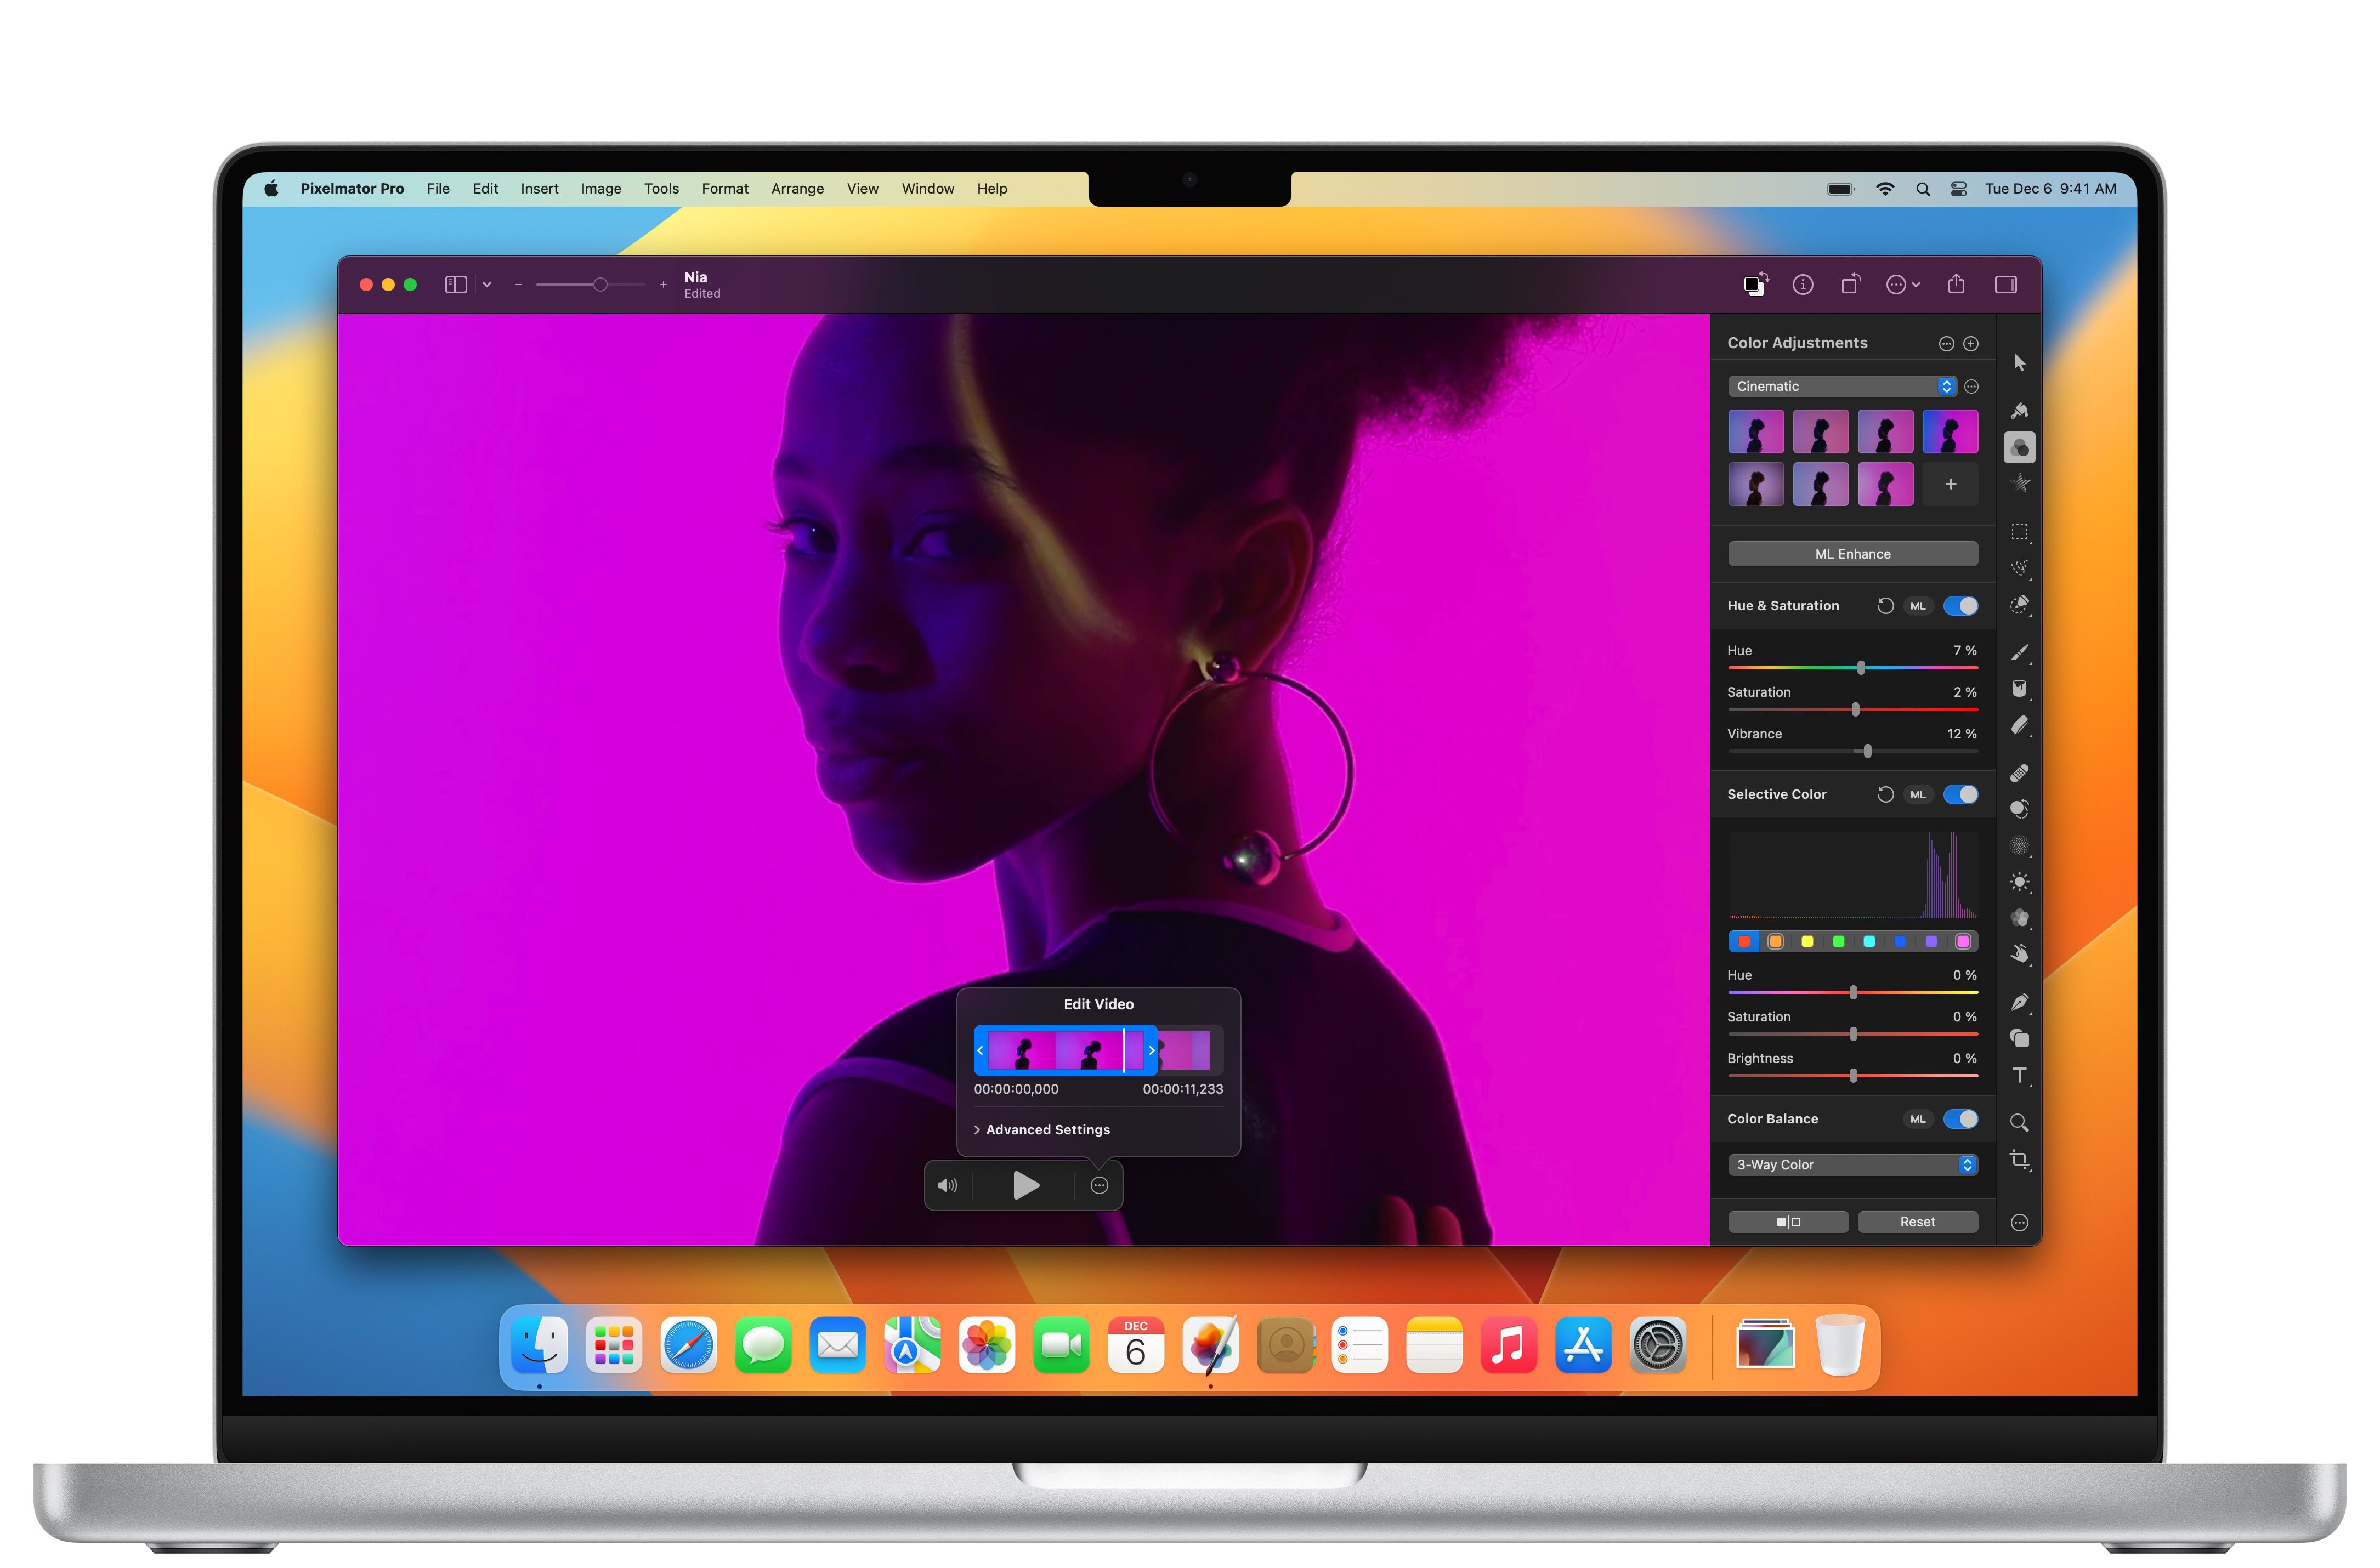 Pixelmator Pro 3.2 for Mac Introduces Video Editing Support